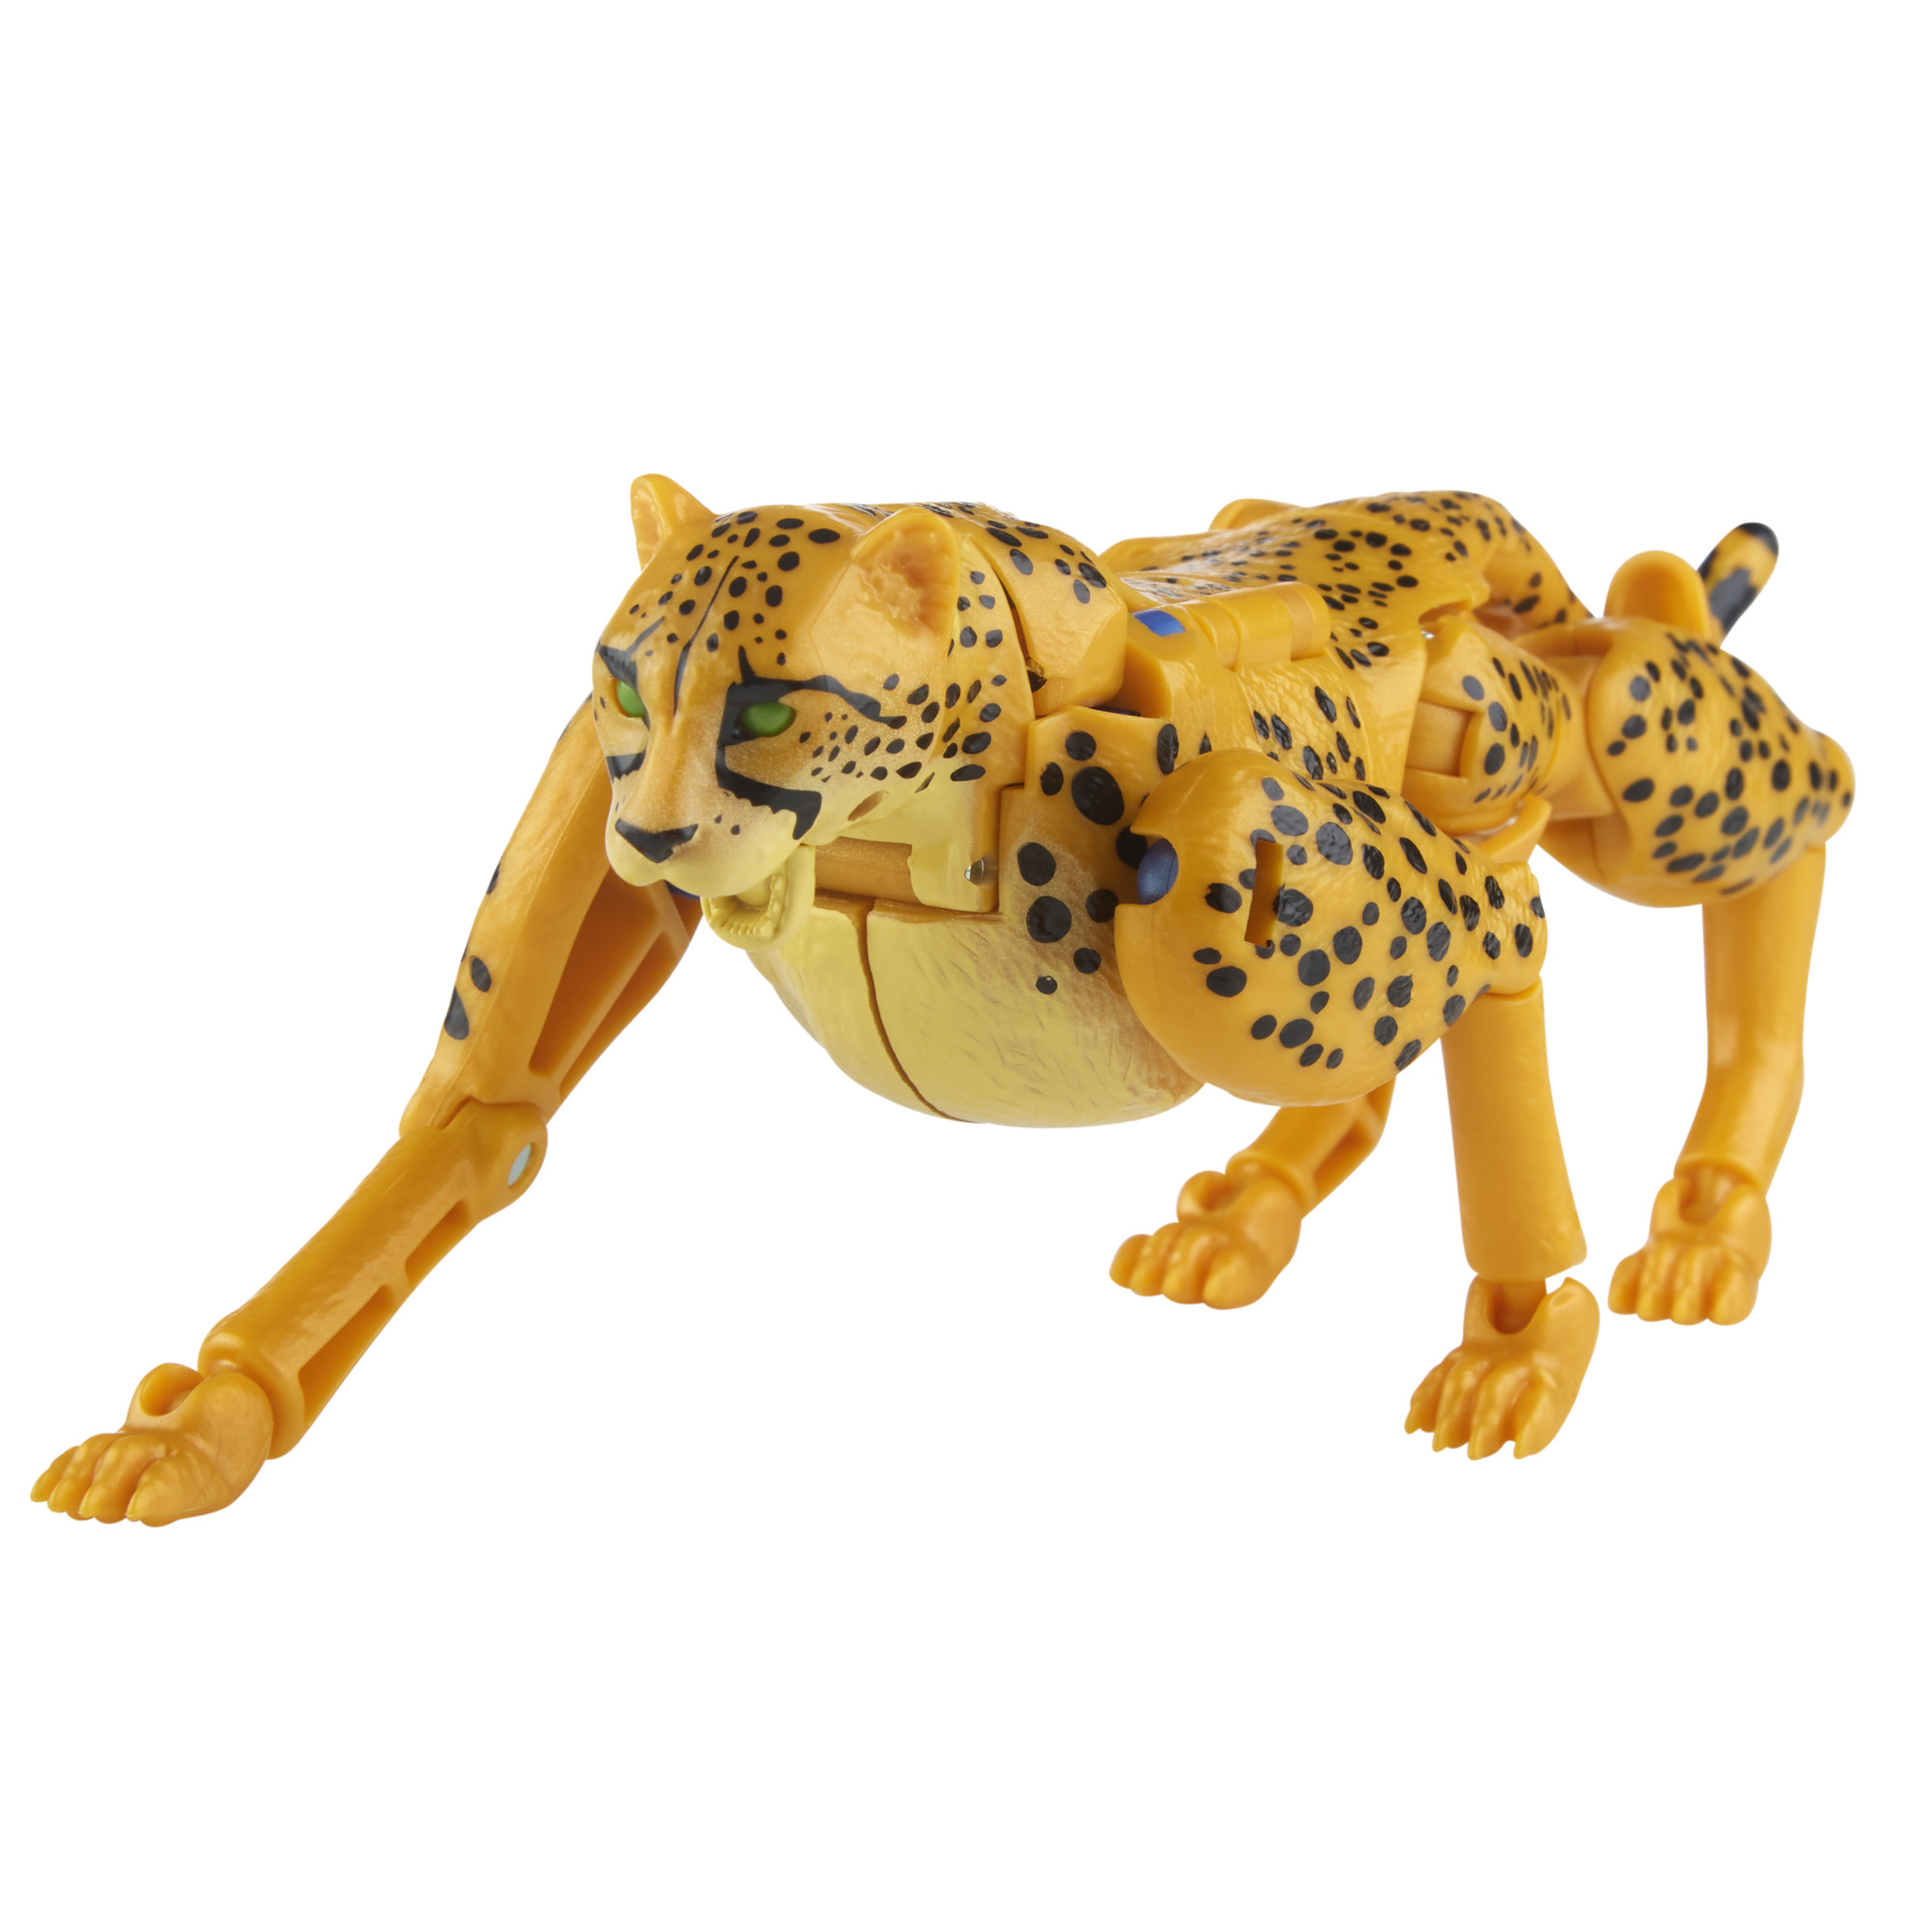 Transformers: War for Cybertron Cheetor Kids Toy Action Figure for Boys and Girls - image 3 of 7